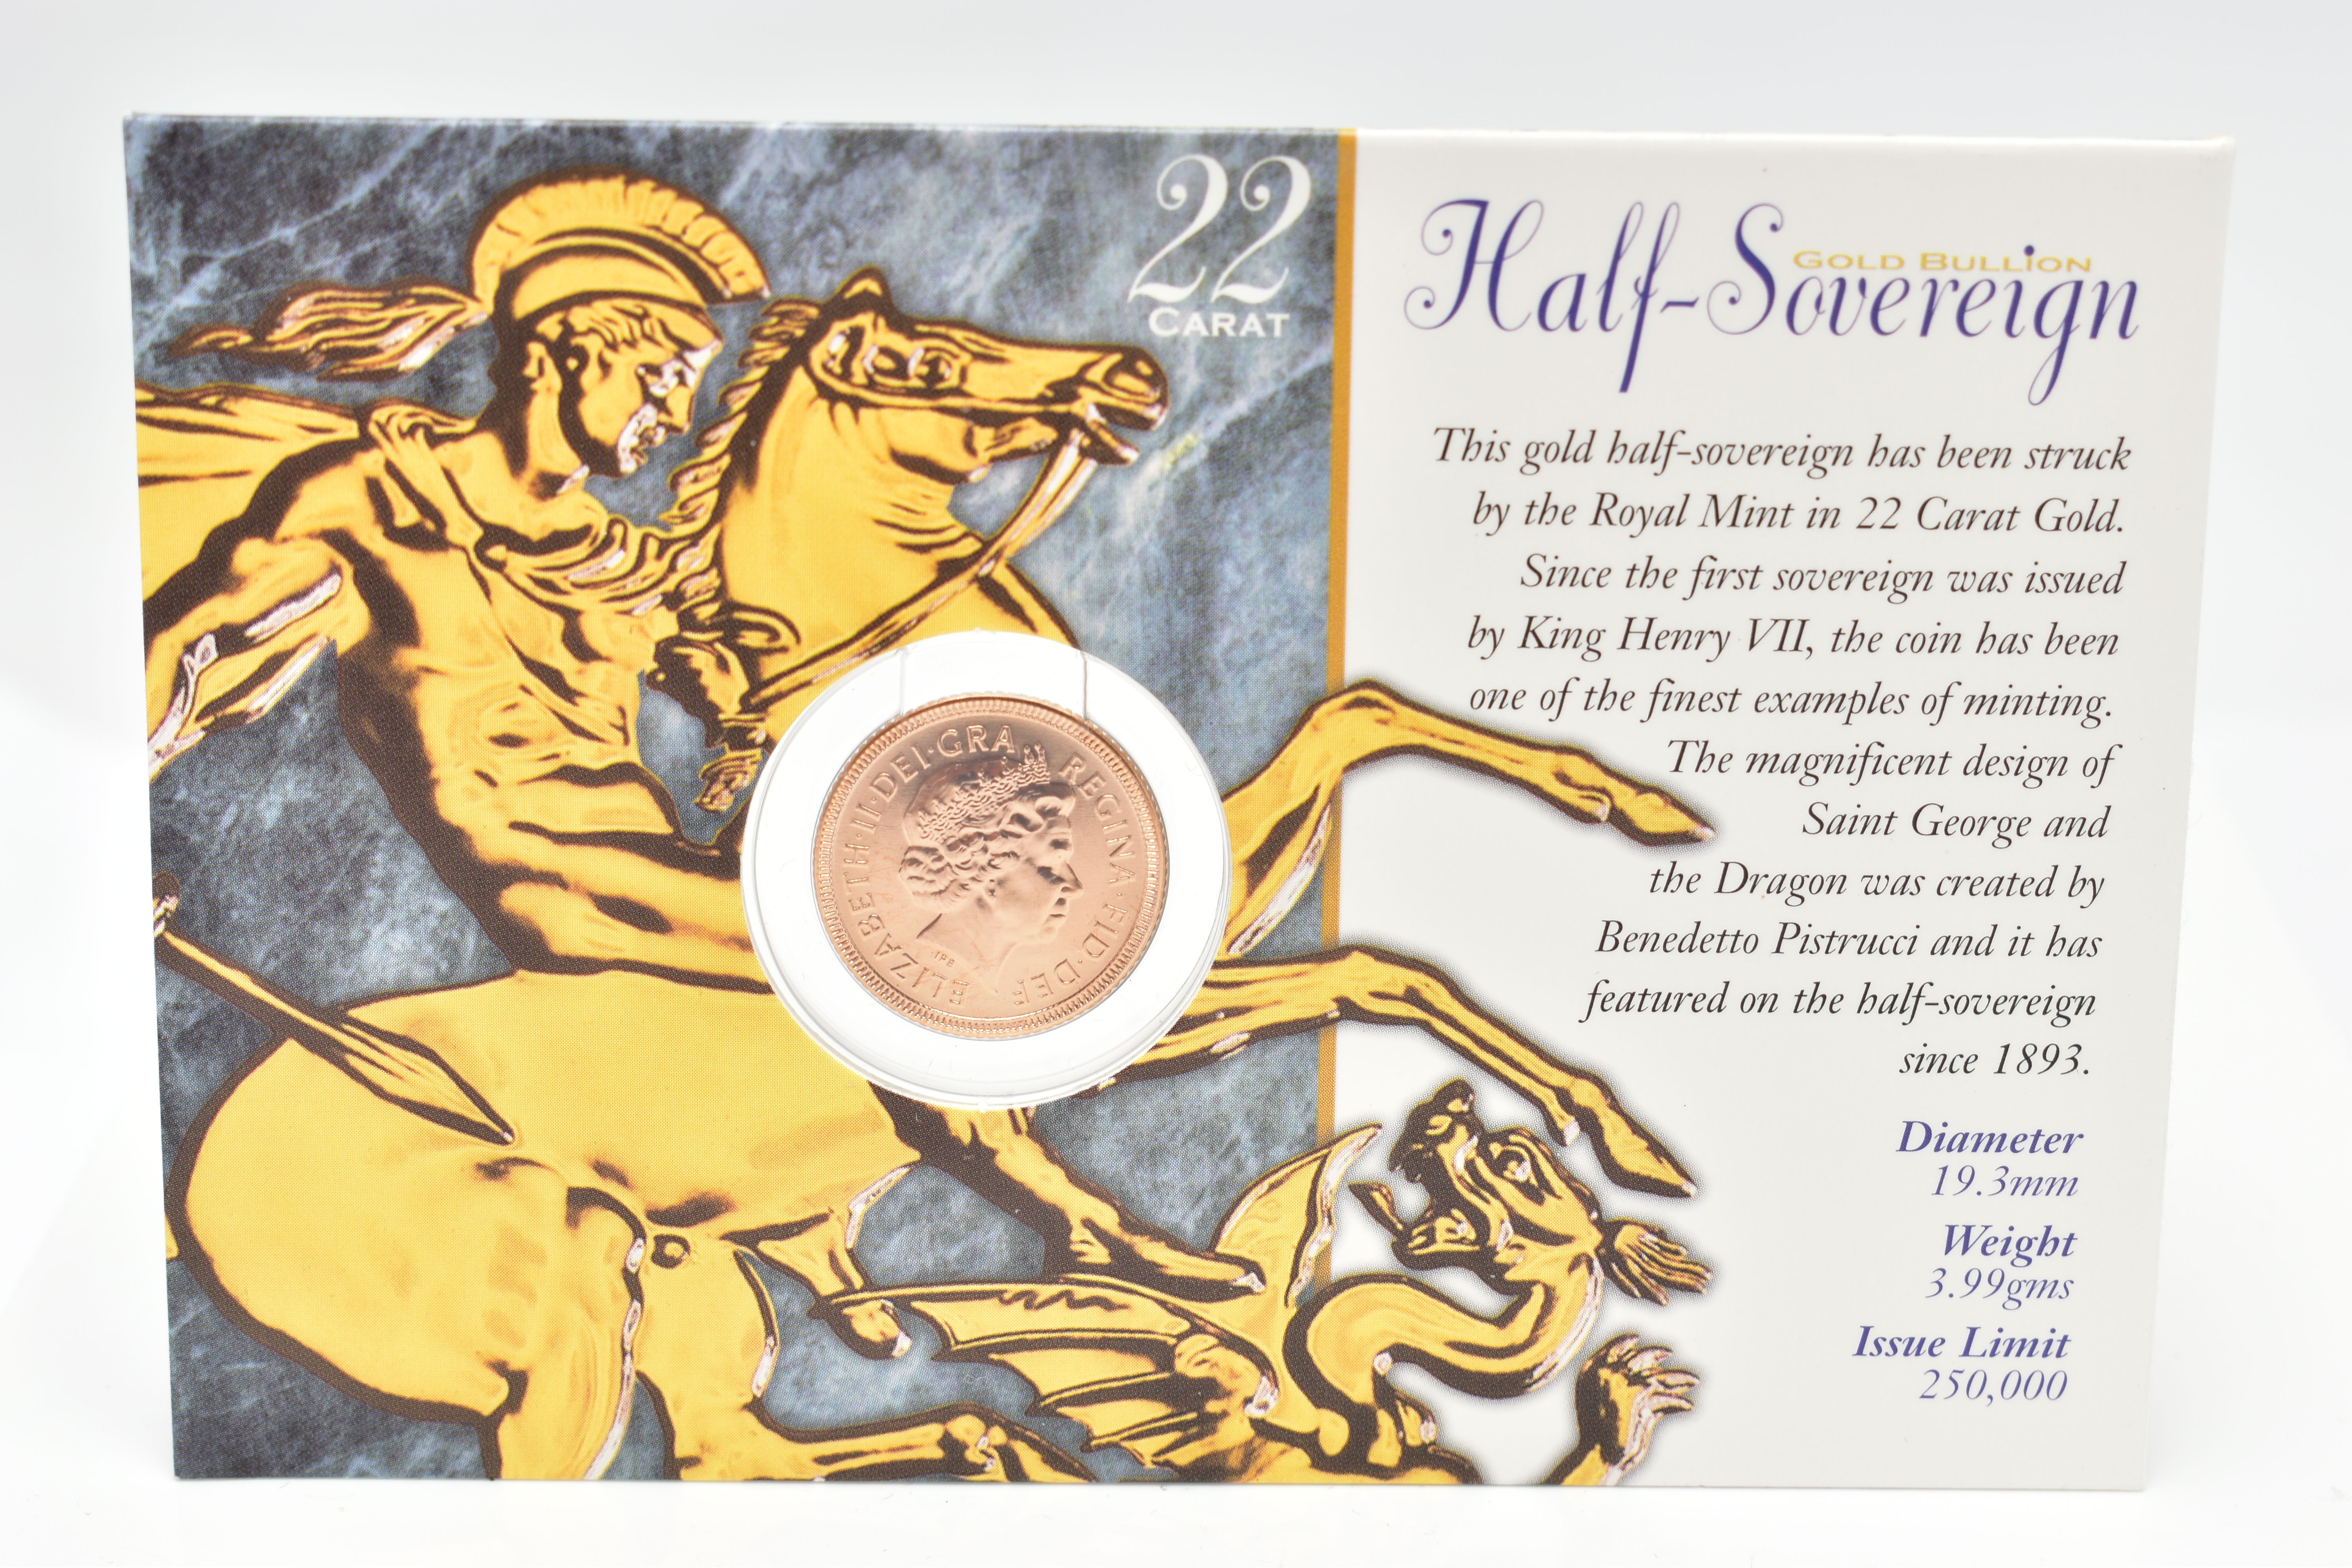 A ROYAL MINT CARDED 2000 GOLD BULLION HALF SOVEREIGN COIN, 19.3mm, 3.99 grams, issue limit 250,000 - Image 2 of 2